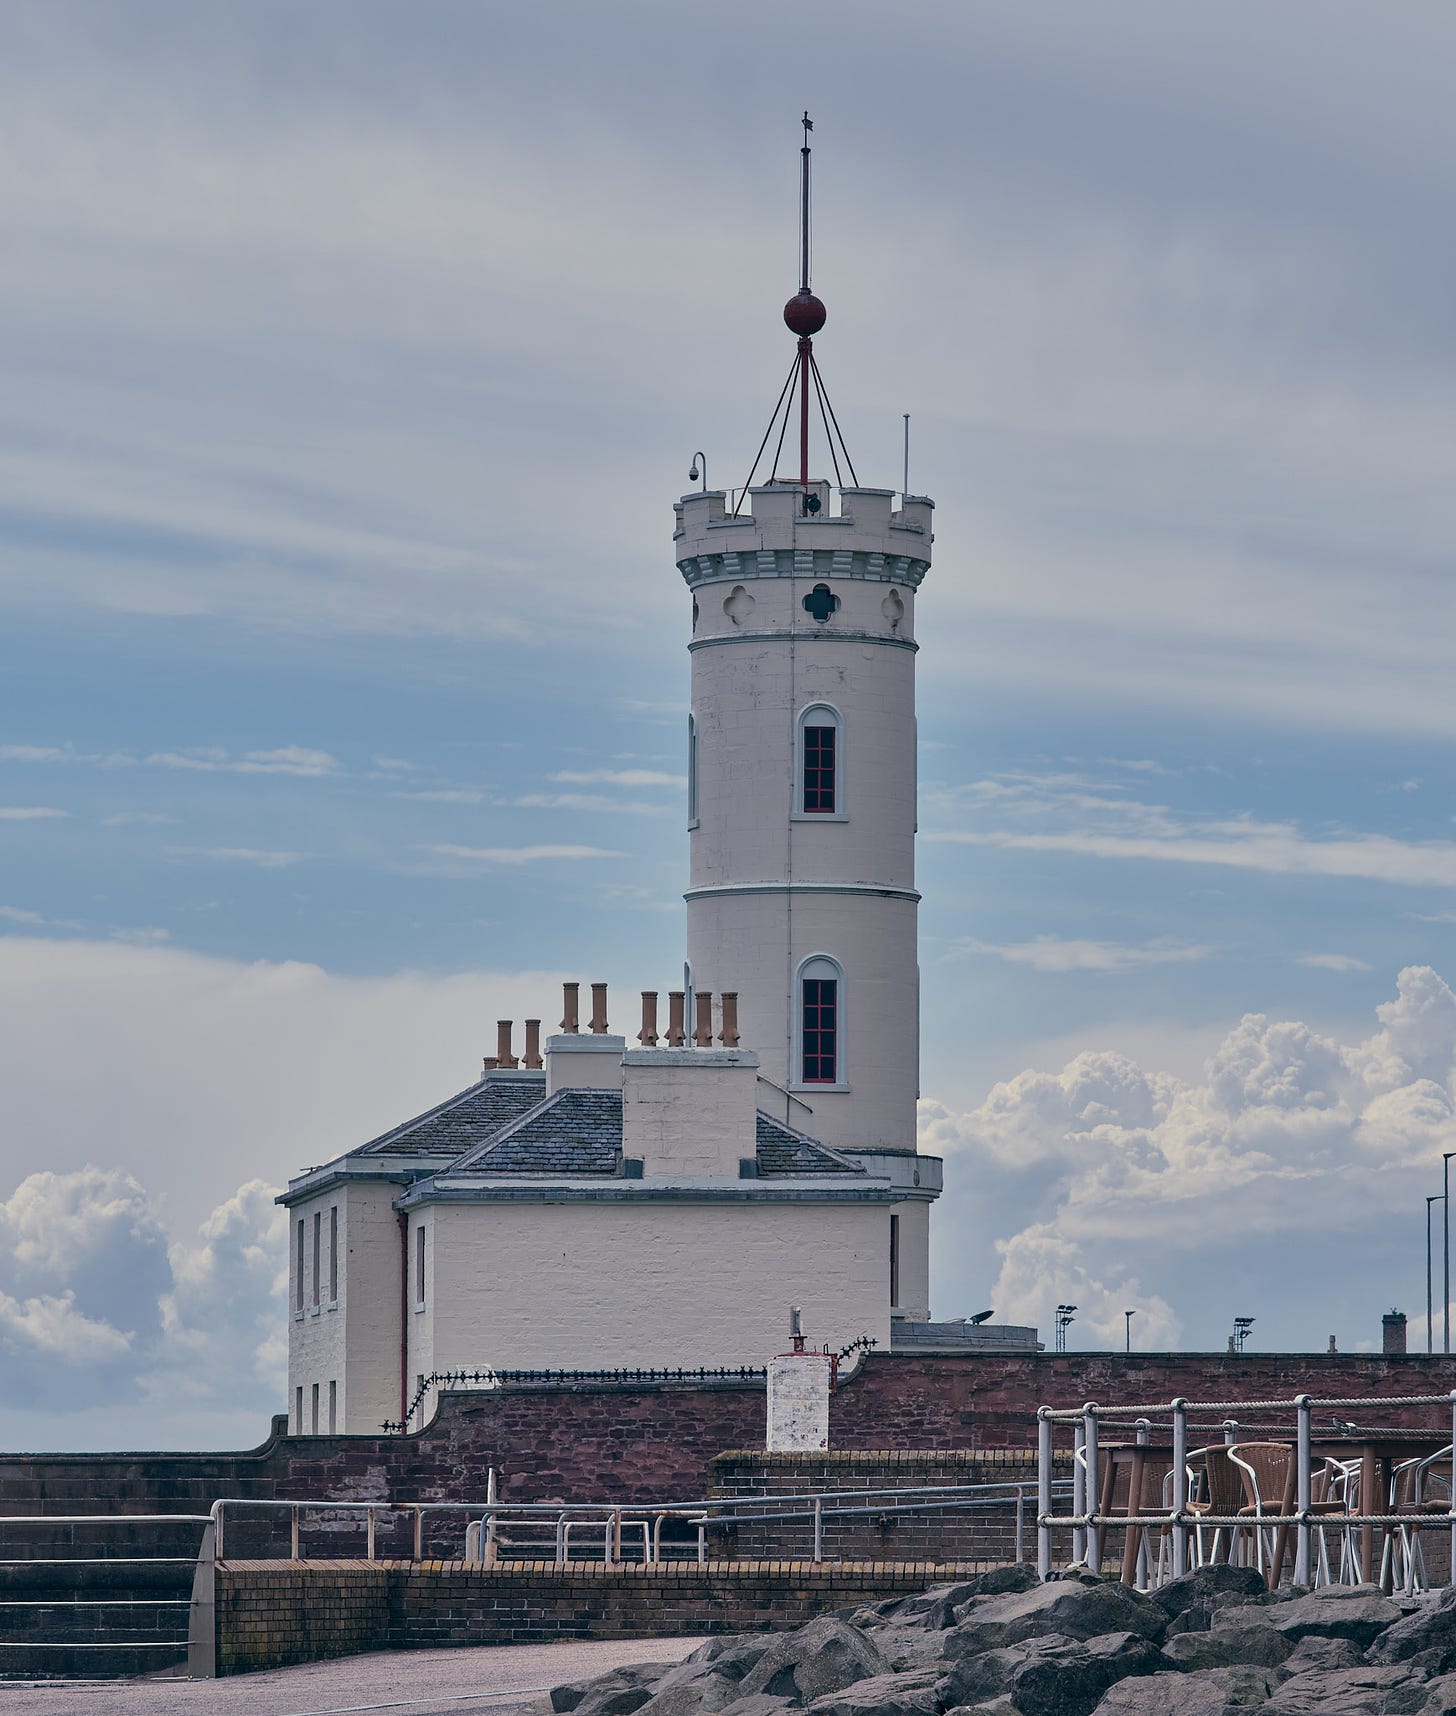 The Signal Tower museum in Arbroath.